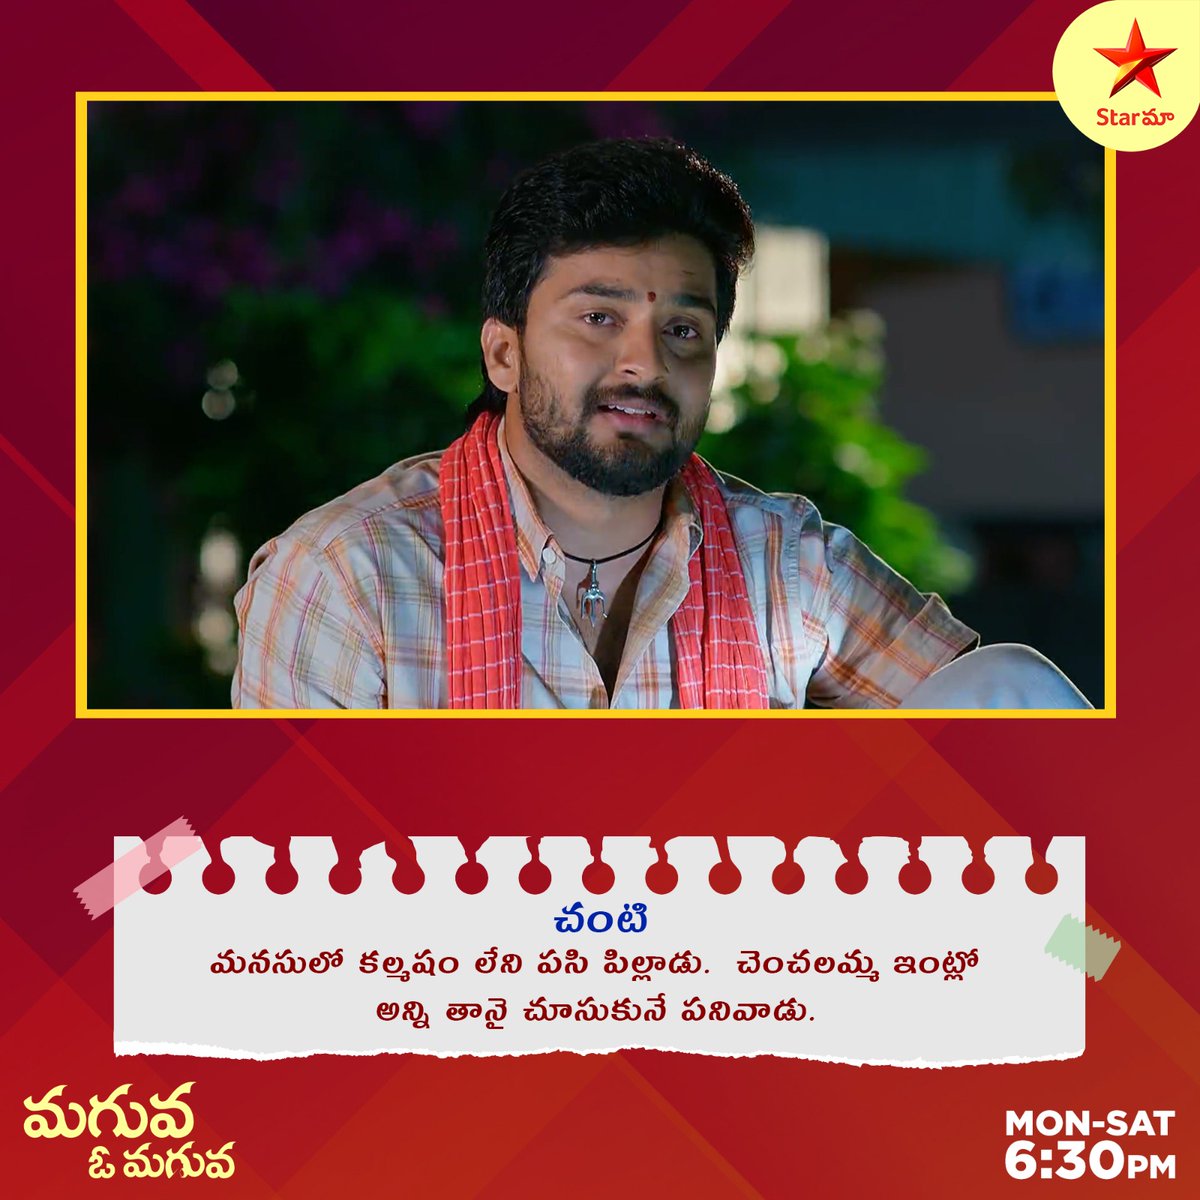 Chanti, a pure-hearted individual who works diligently in Chenchalamma's house, earning the family's trust and respect. 💫 Join us as Chanti's endearing character unfolds in #MaguavoMaguva! Don't miss the heartfelt moments on Star Maa. 🌟 #Starmaa #Starmaaserials